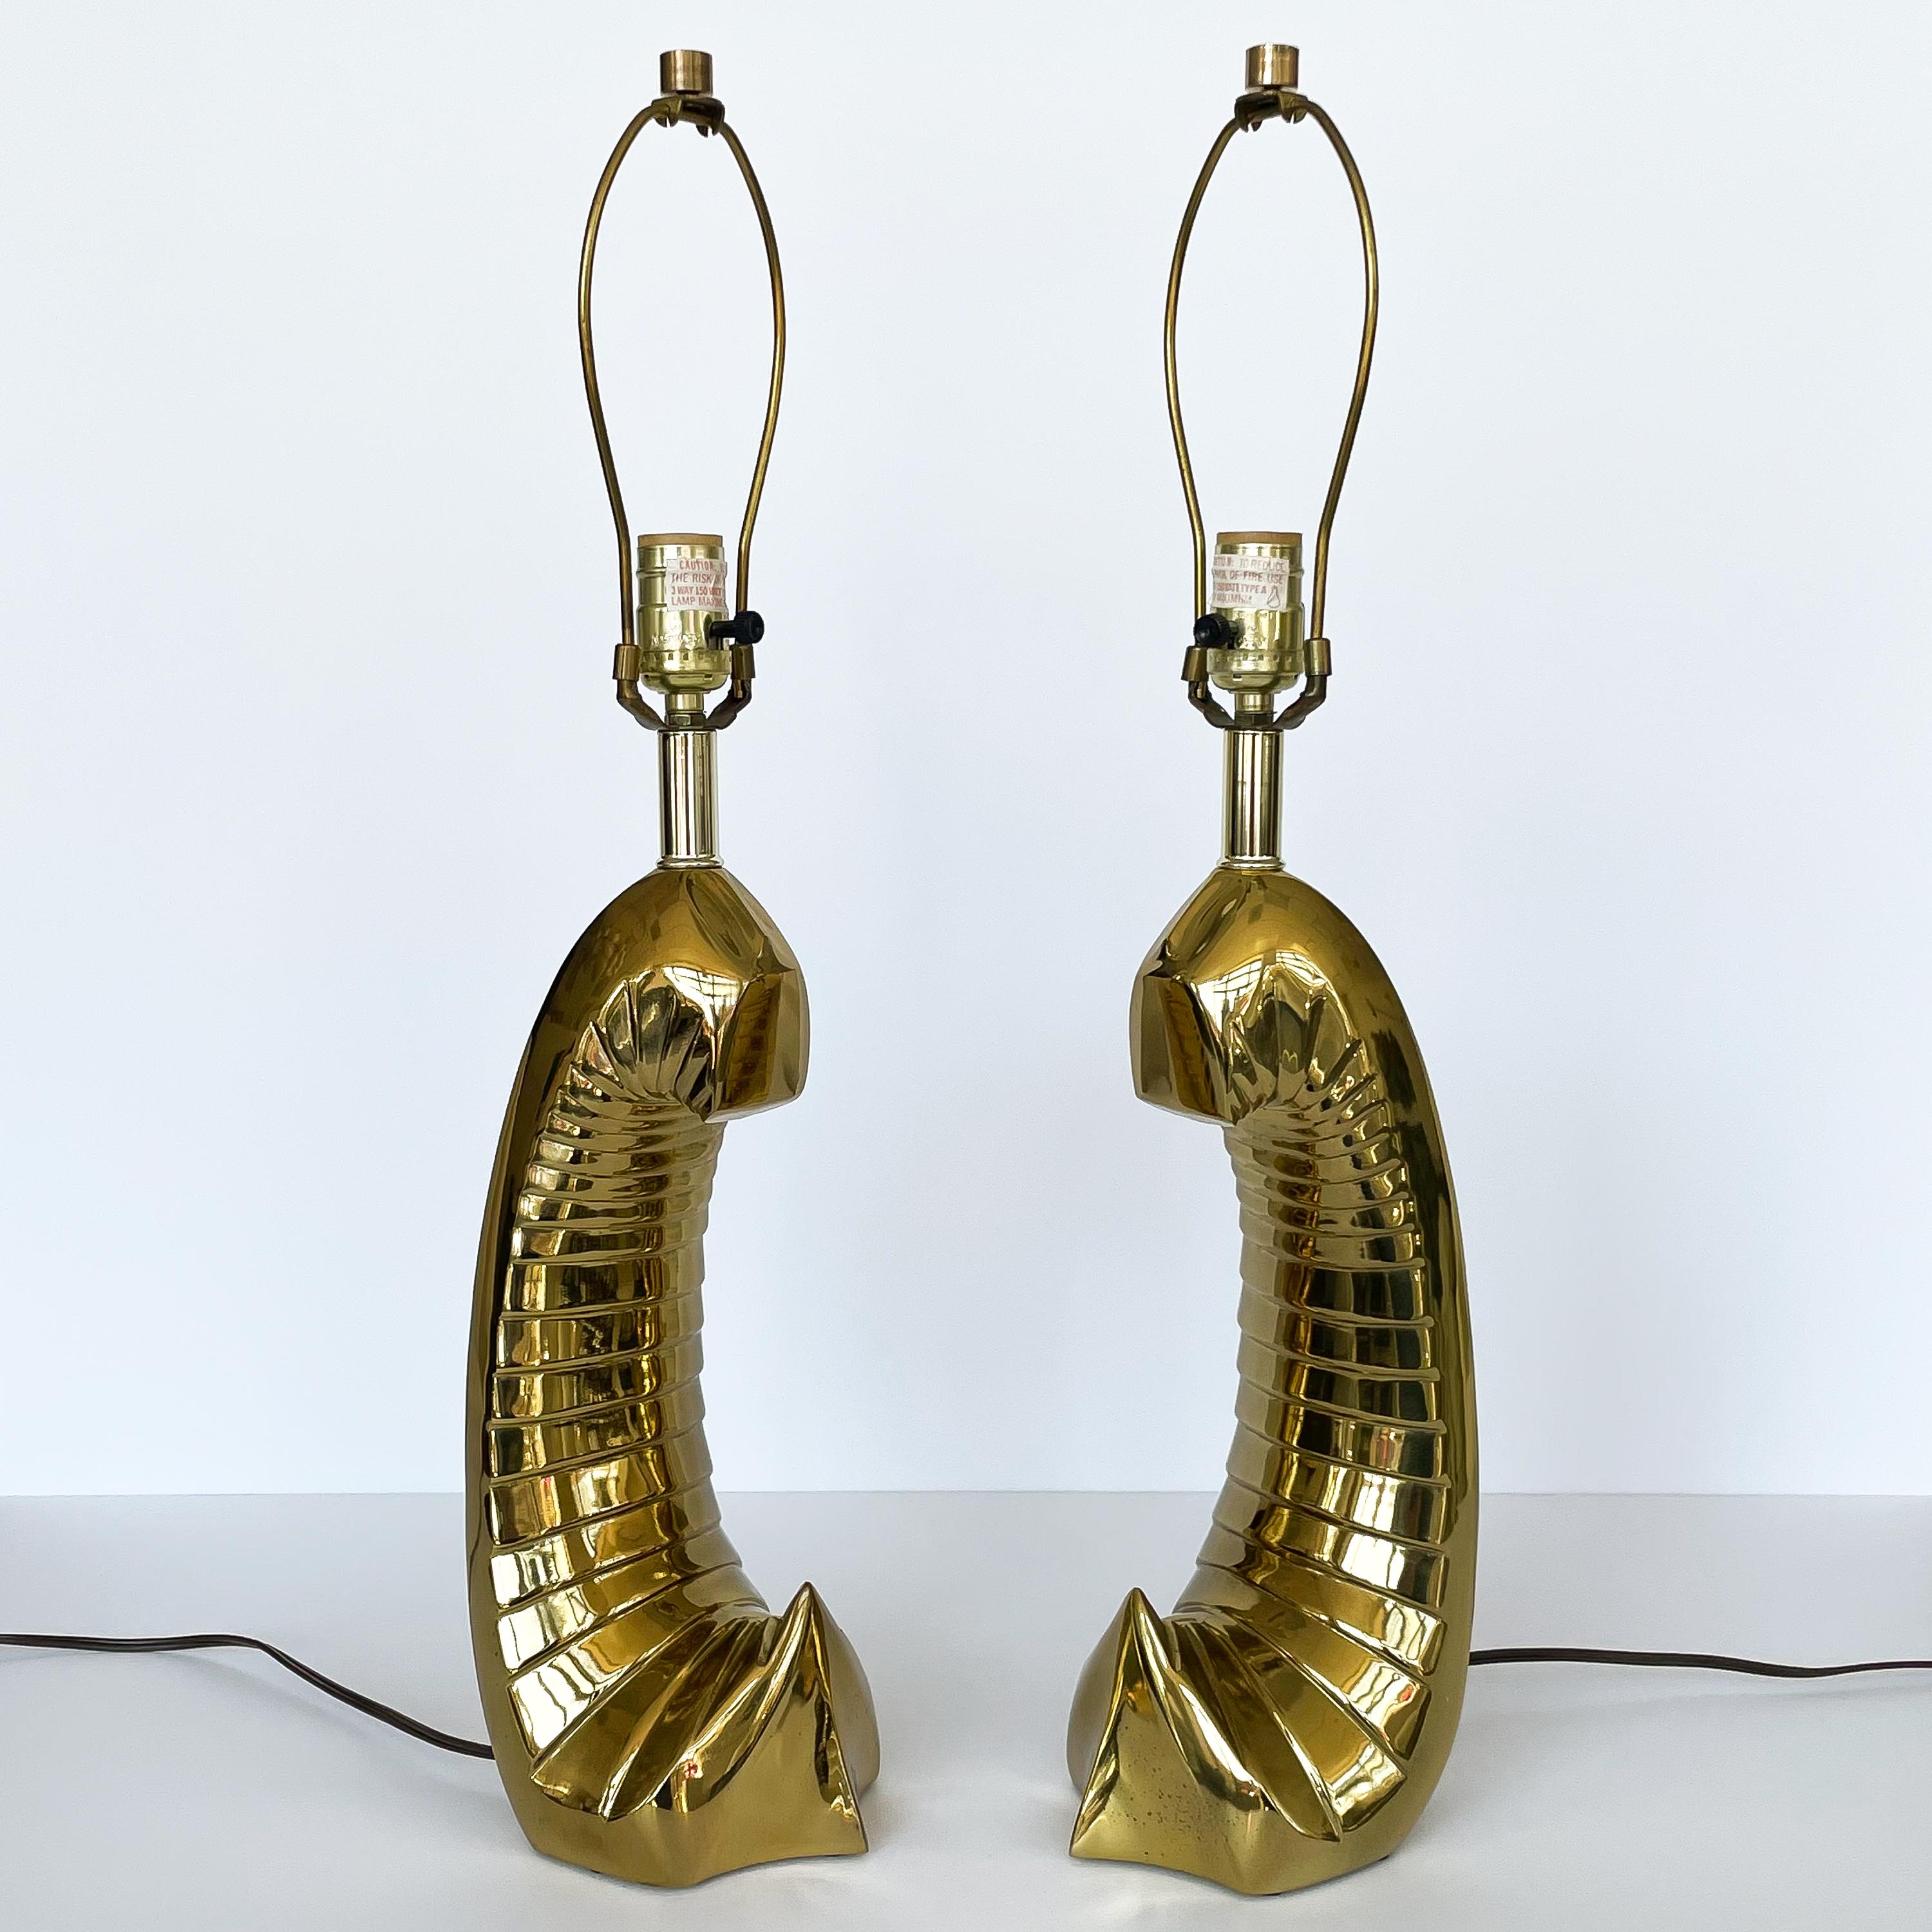 Pair of unusual modern sculptural brass table lamps by Carl Falkenstein, circa 1980s. This pair of table lamps feature a unique abstract anthropomorphic brass form. Definitely a conversation starter! Each lamp takes one standard base light bulb.